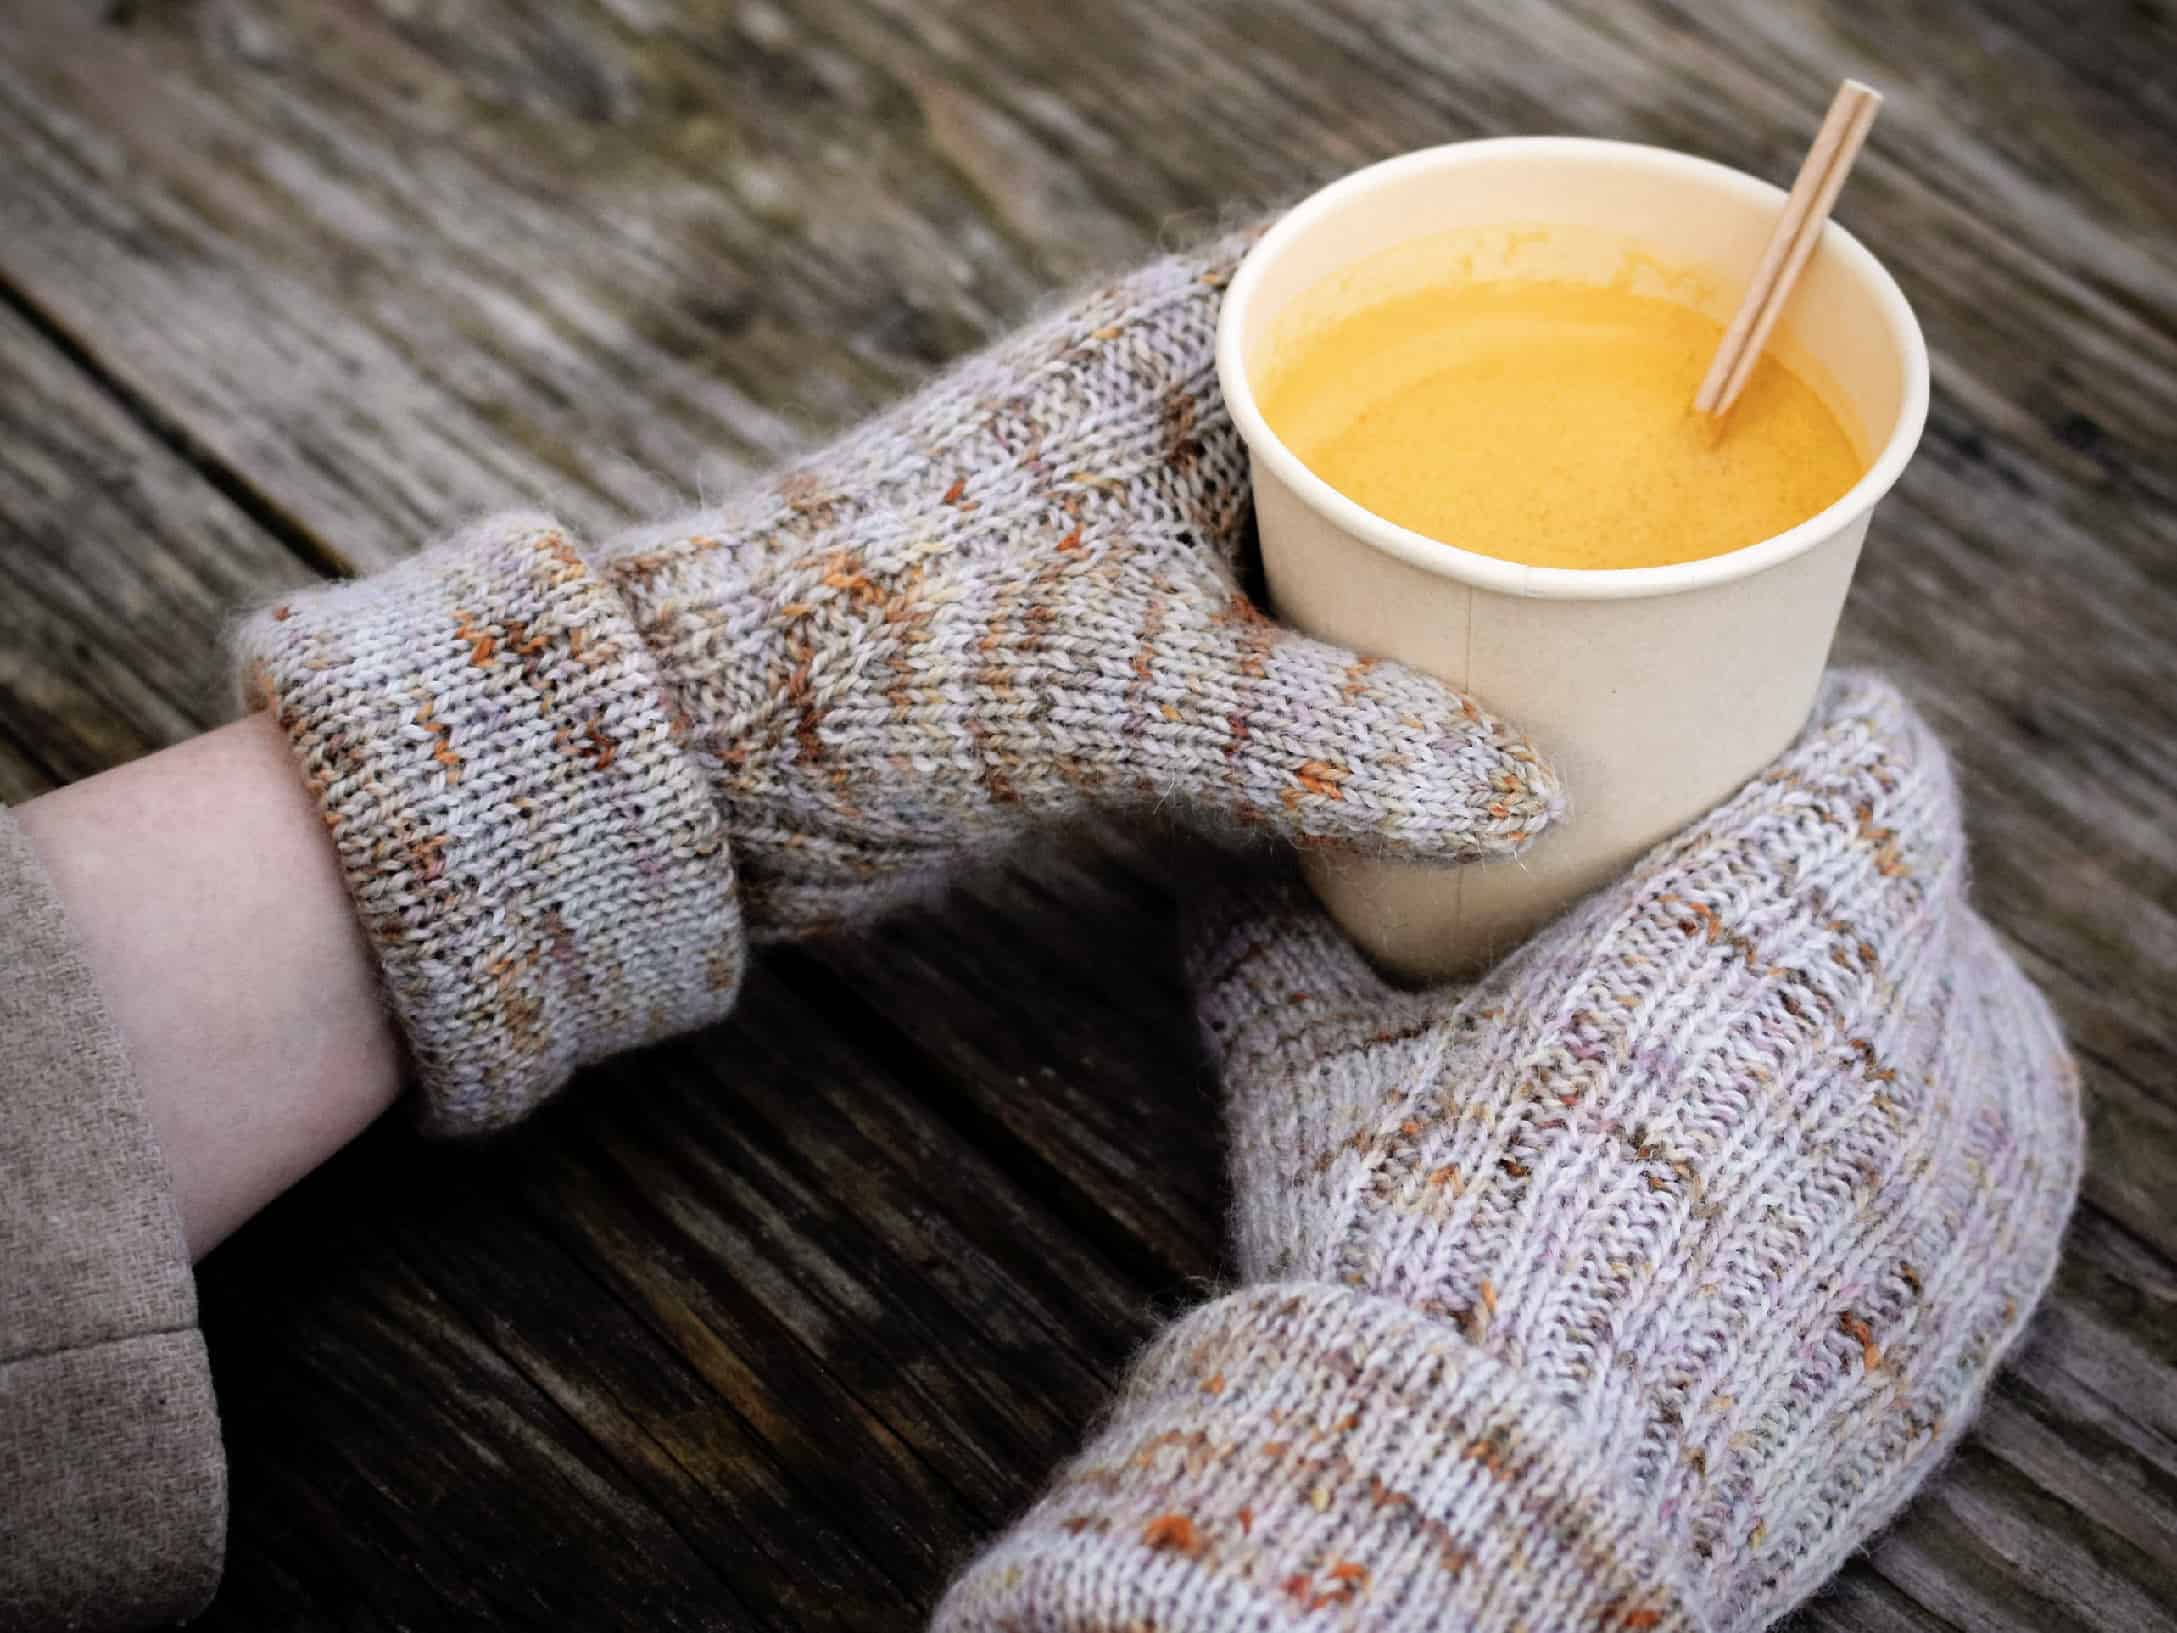 Hands in gray speckled mittens holding a golden beverage.